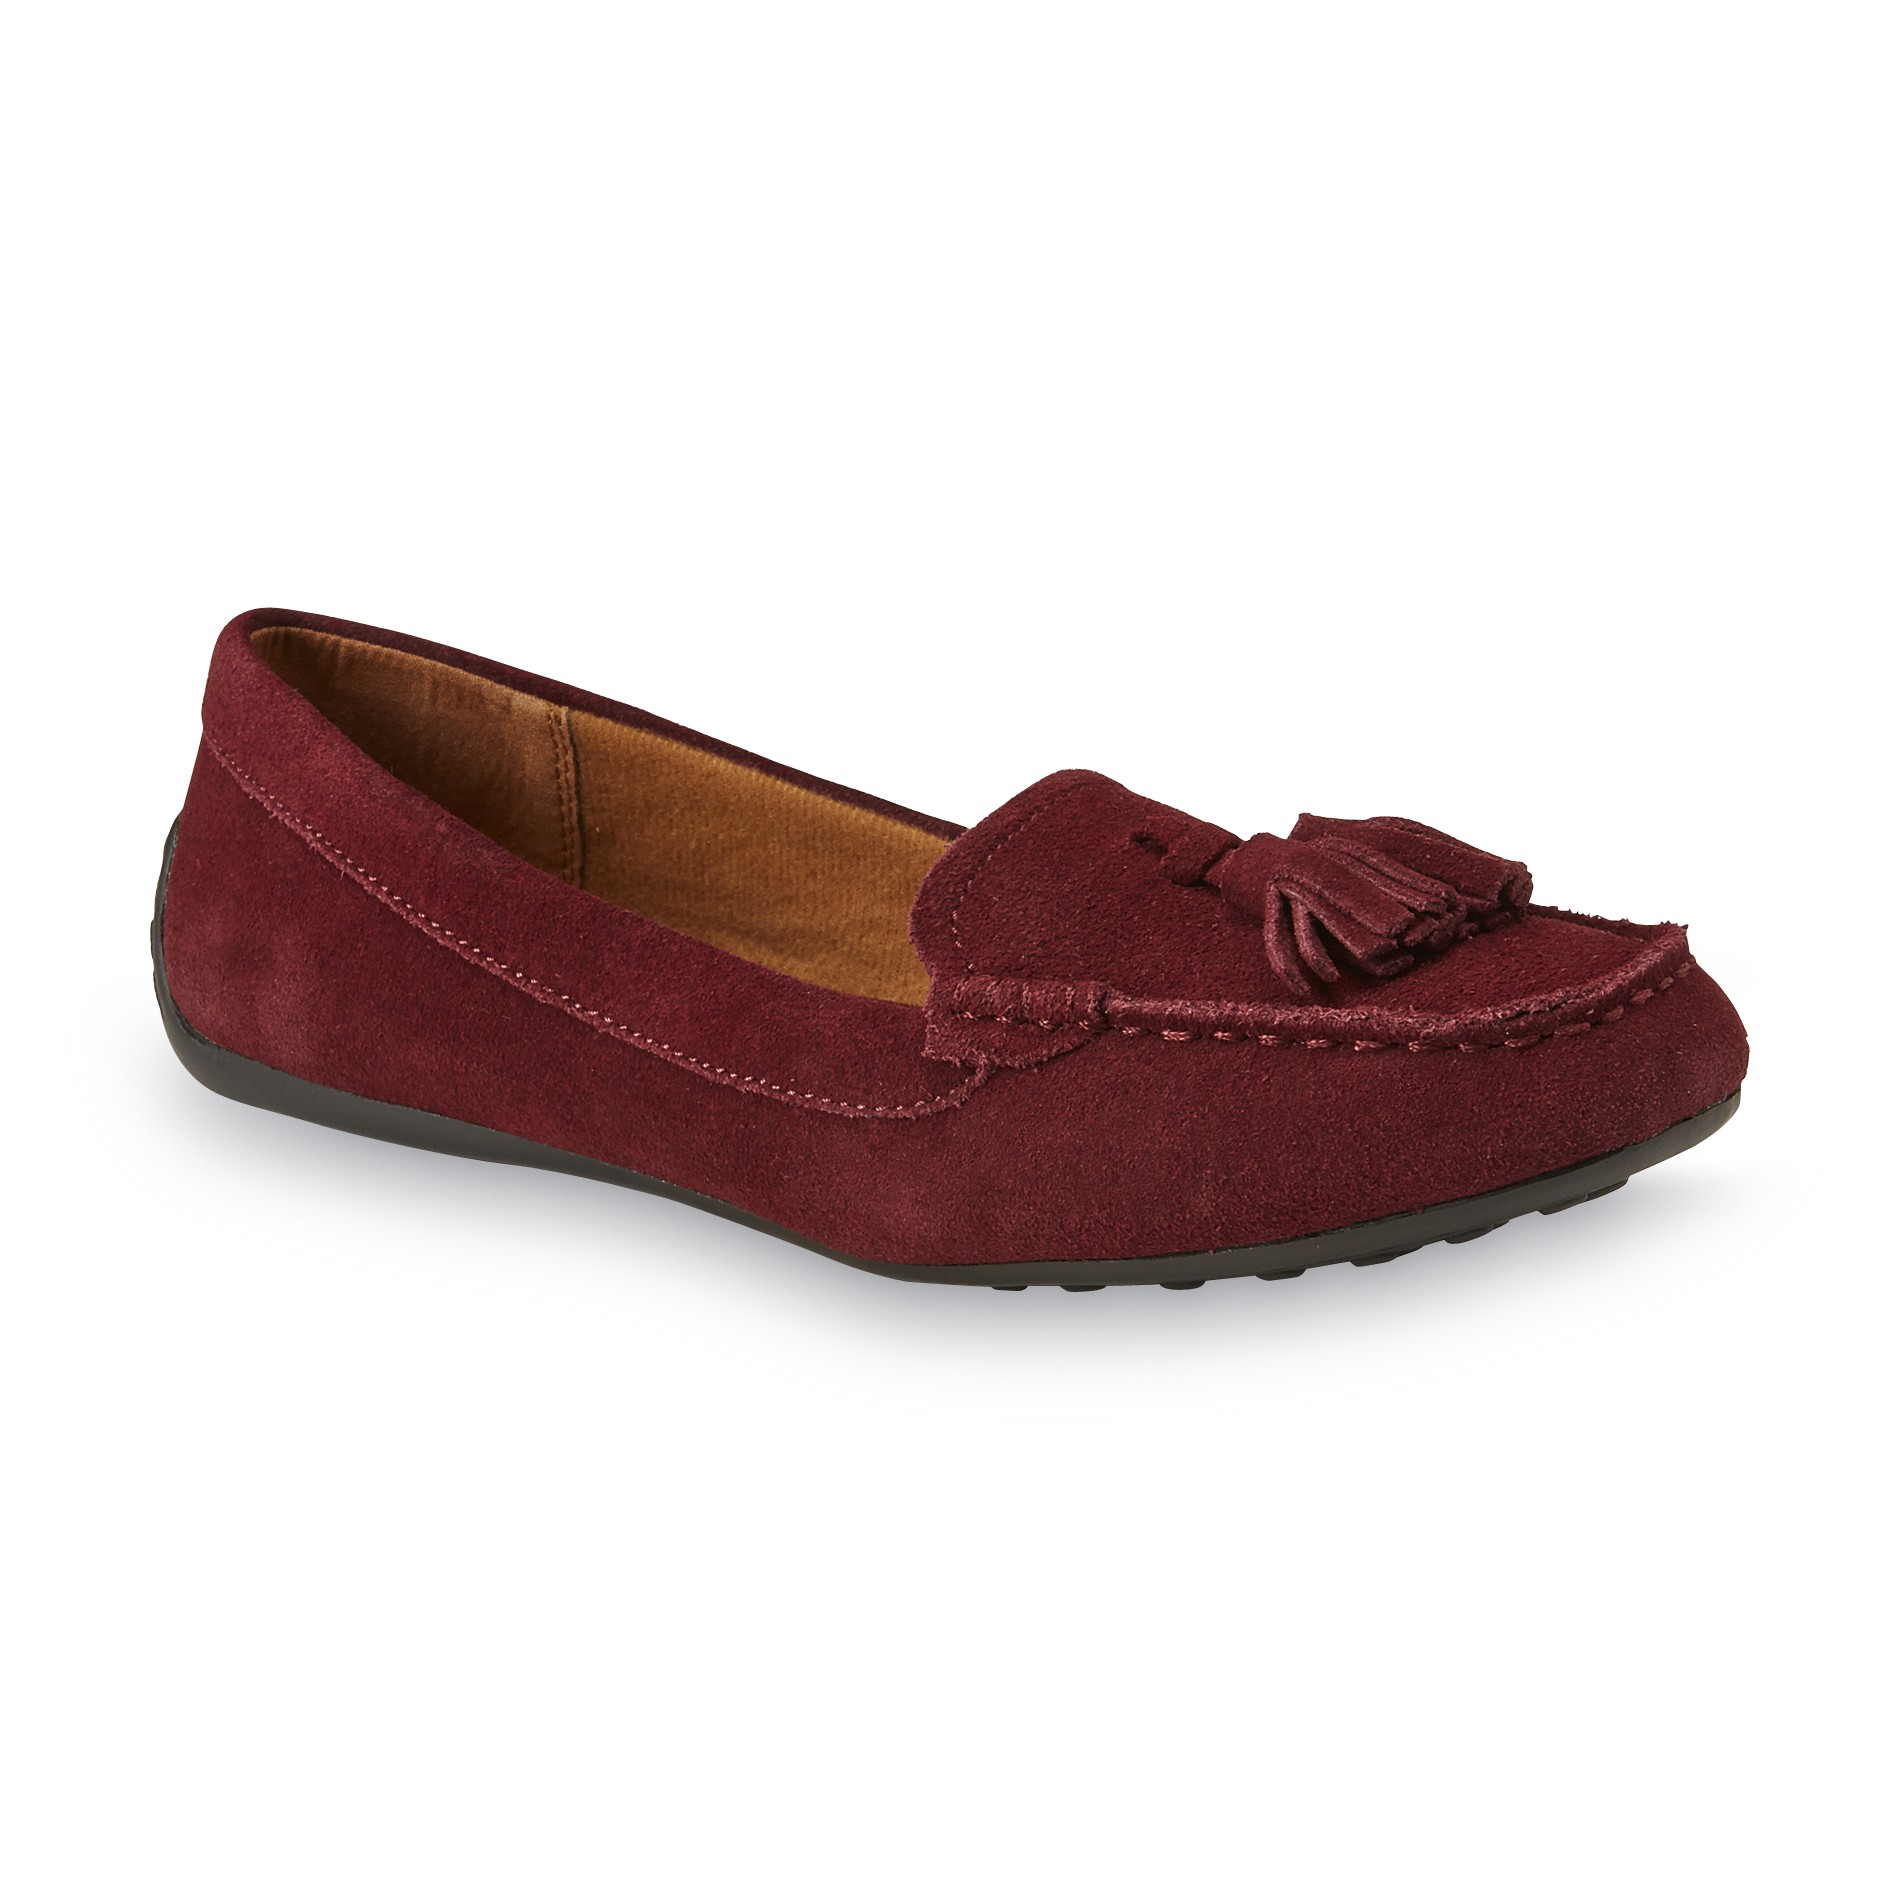 I Love Comfort Women's Darcy Moccasin Loafer - Wine